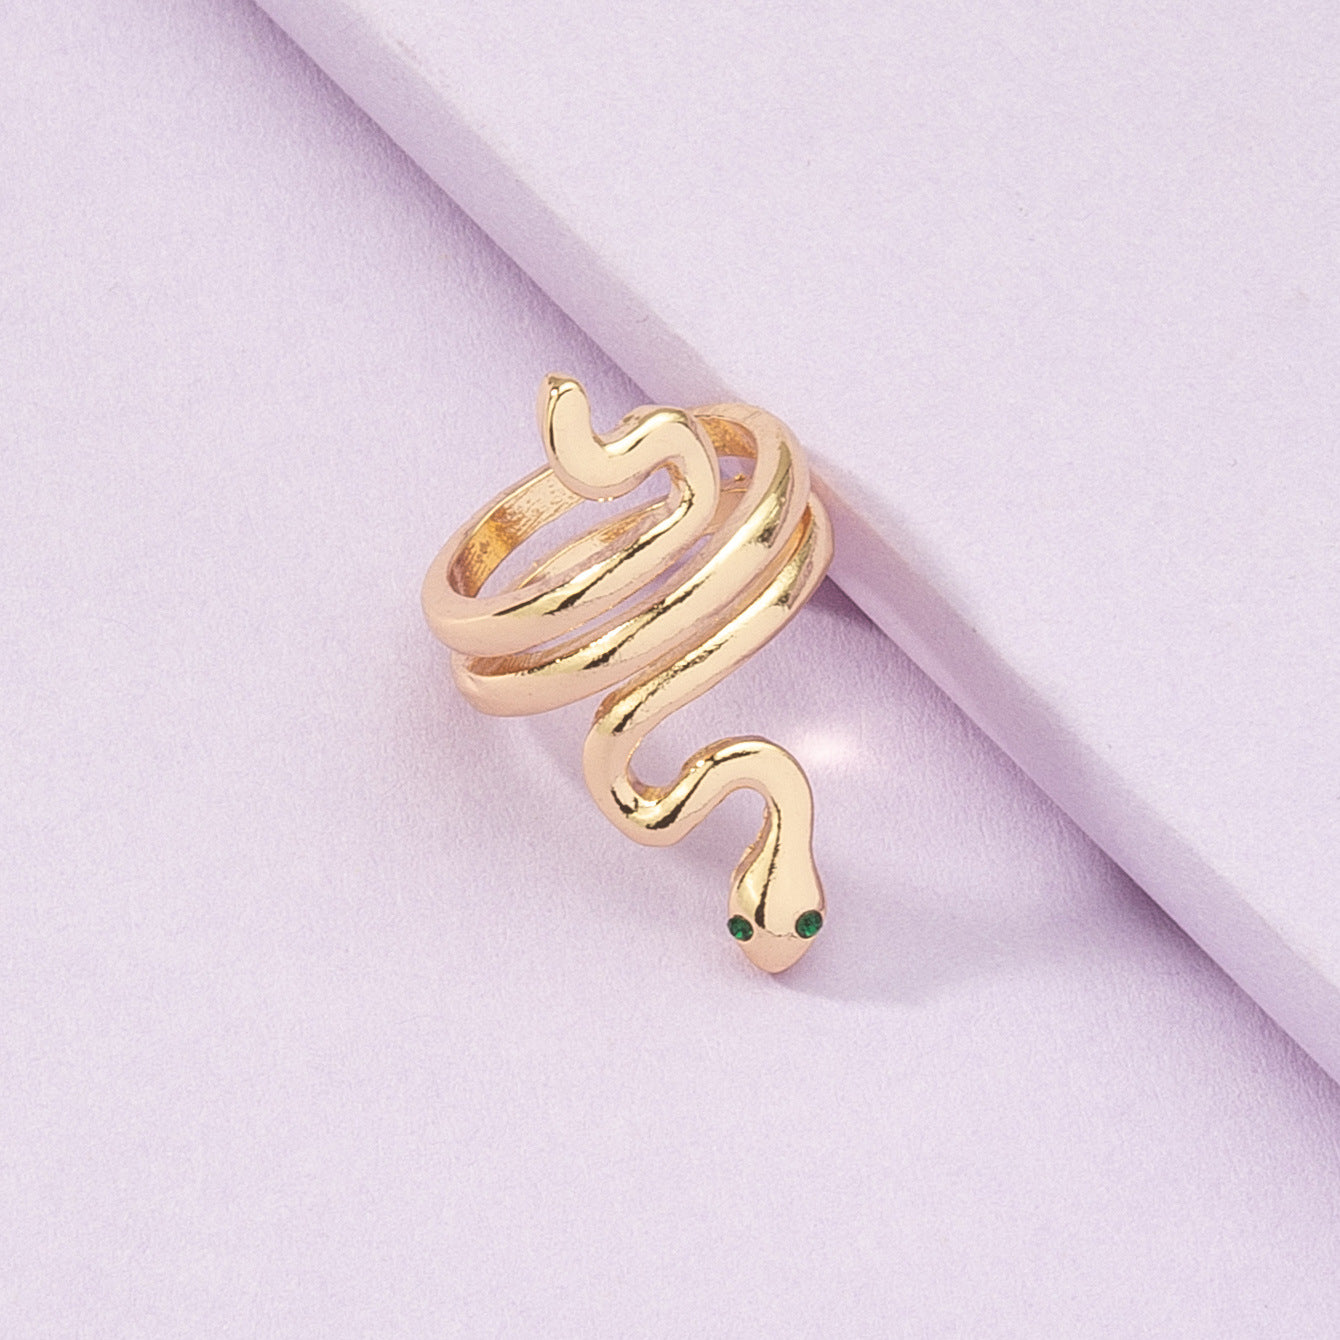 Wholesale Snake Ring with Cross-Border Charm